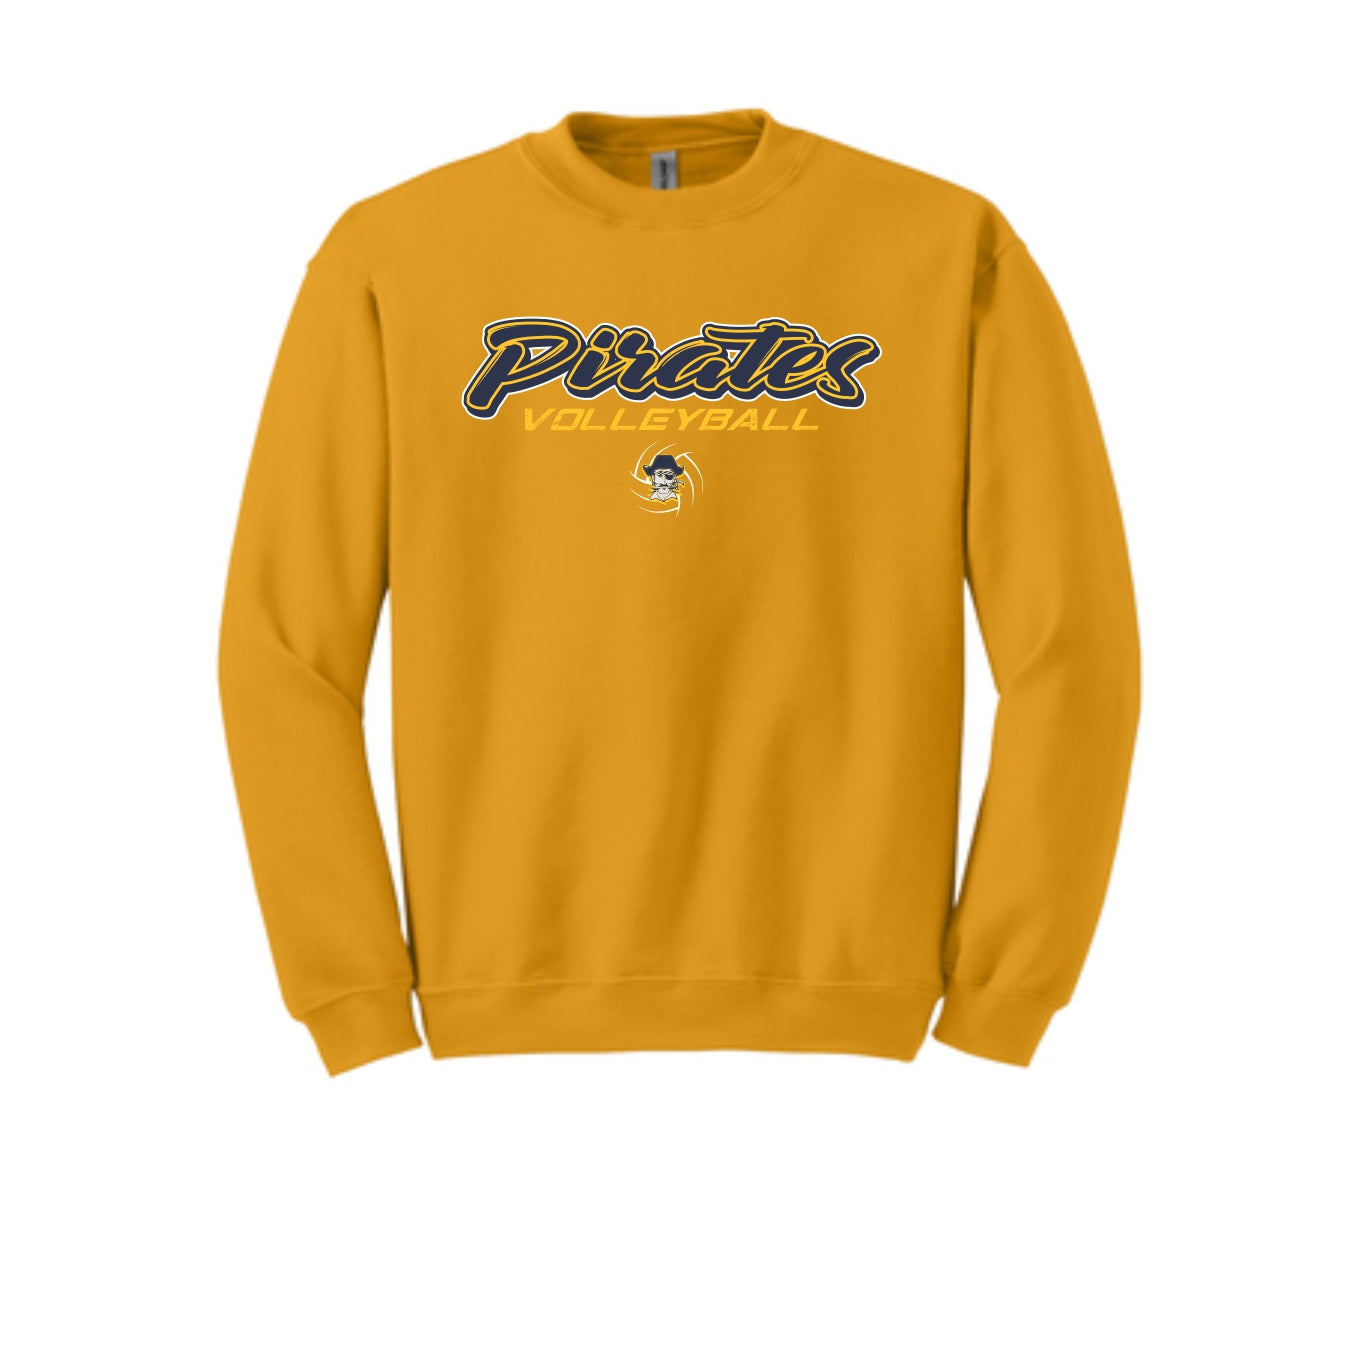 Pirate Volleyball - Fleece Crew - Adult/Youth